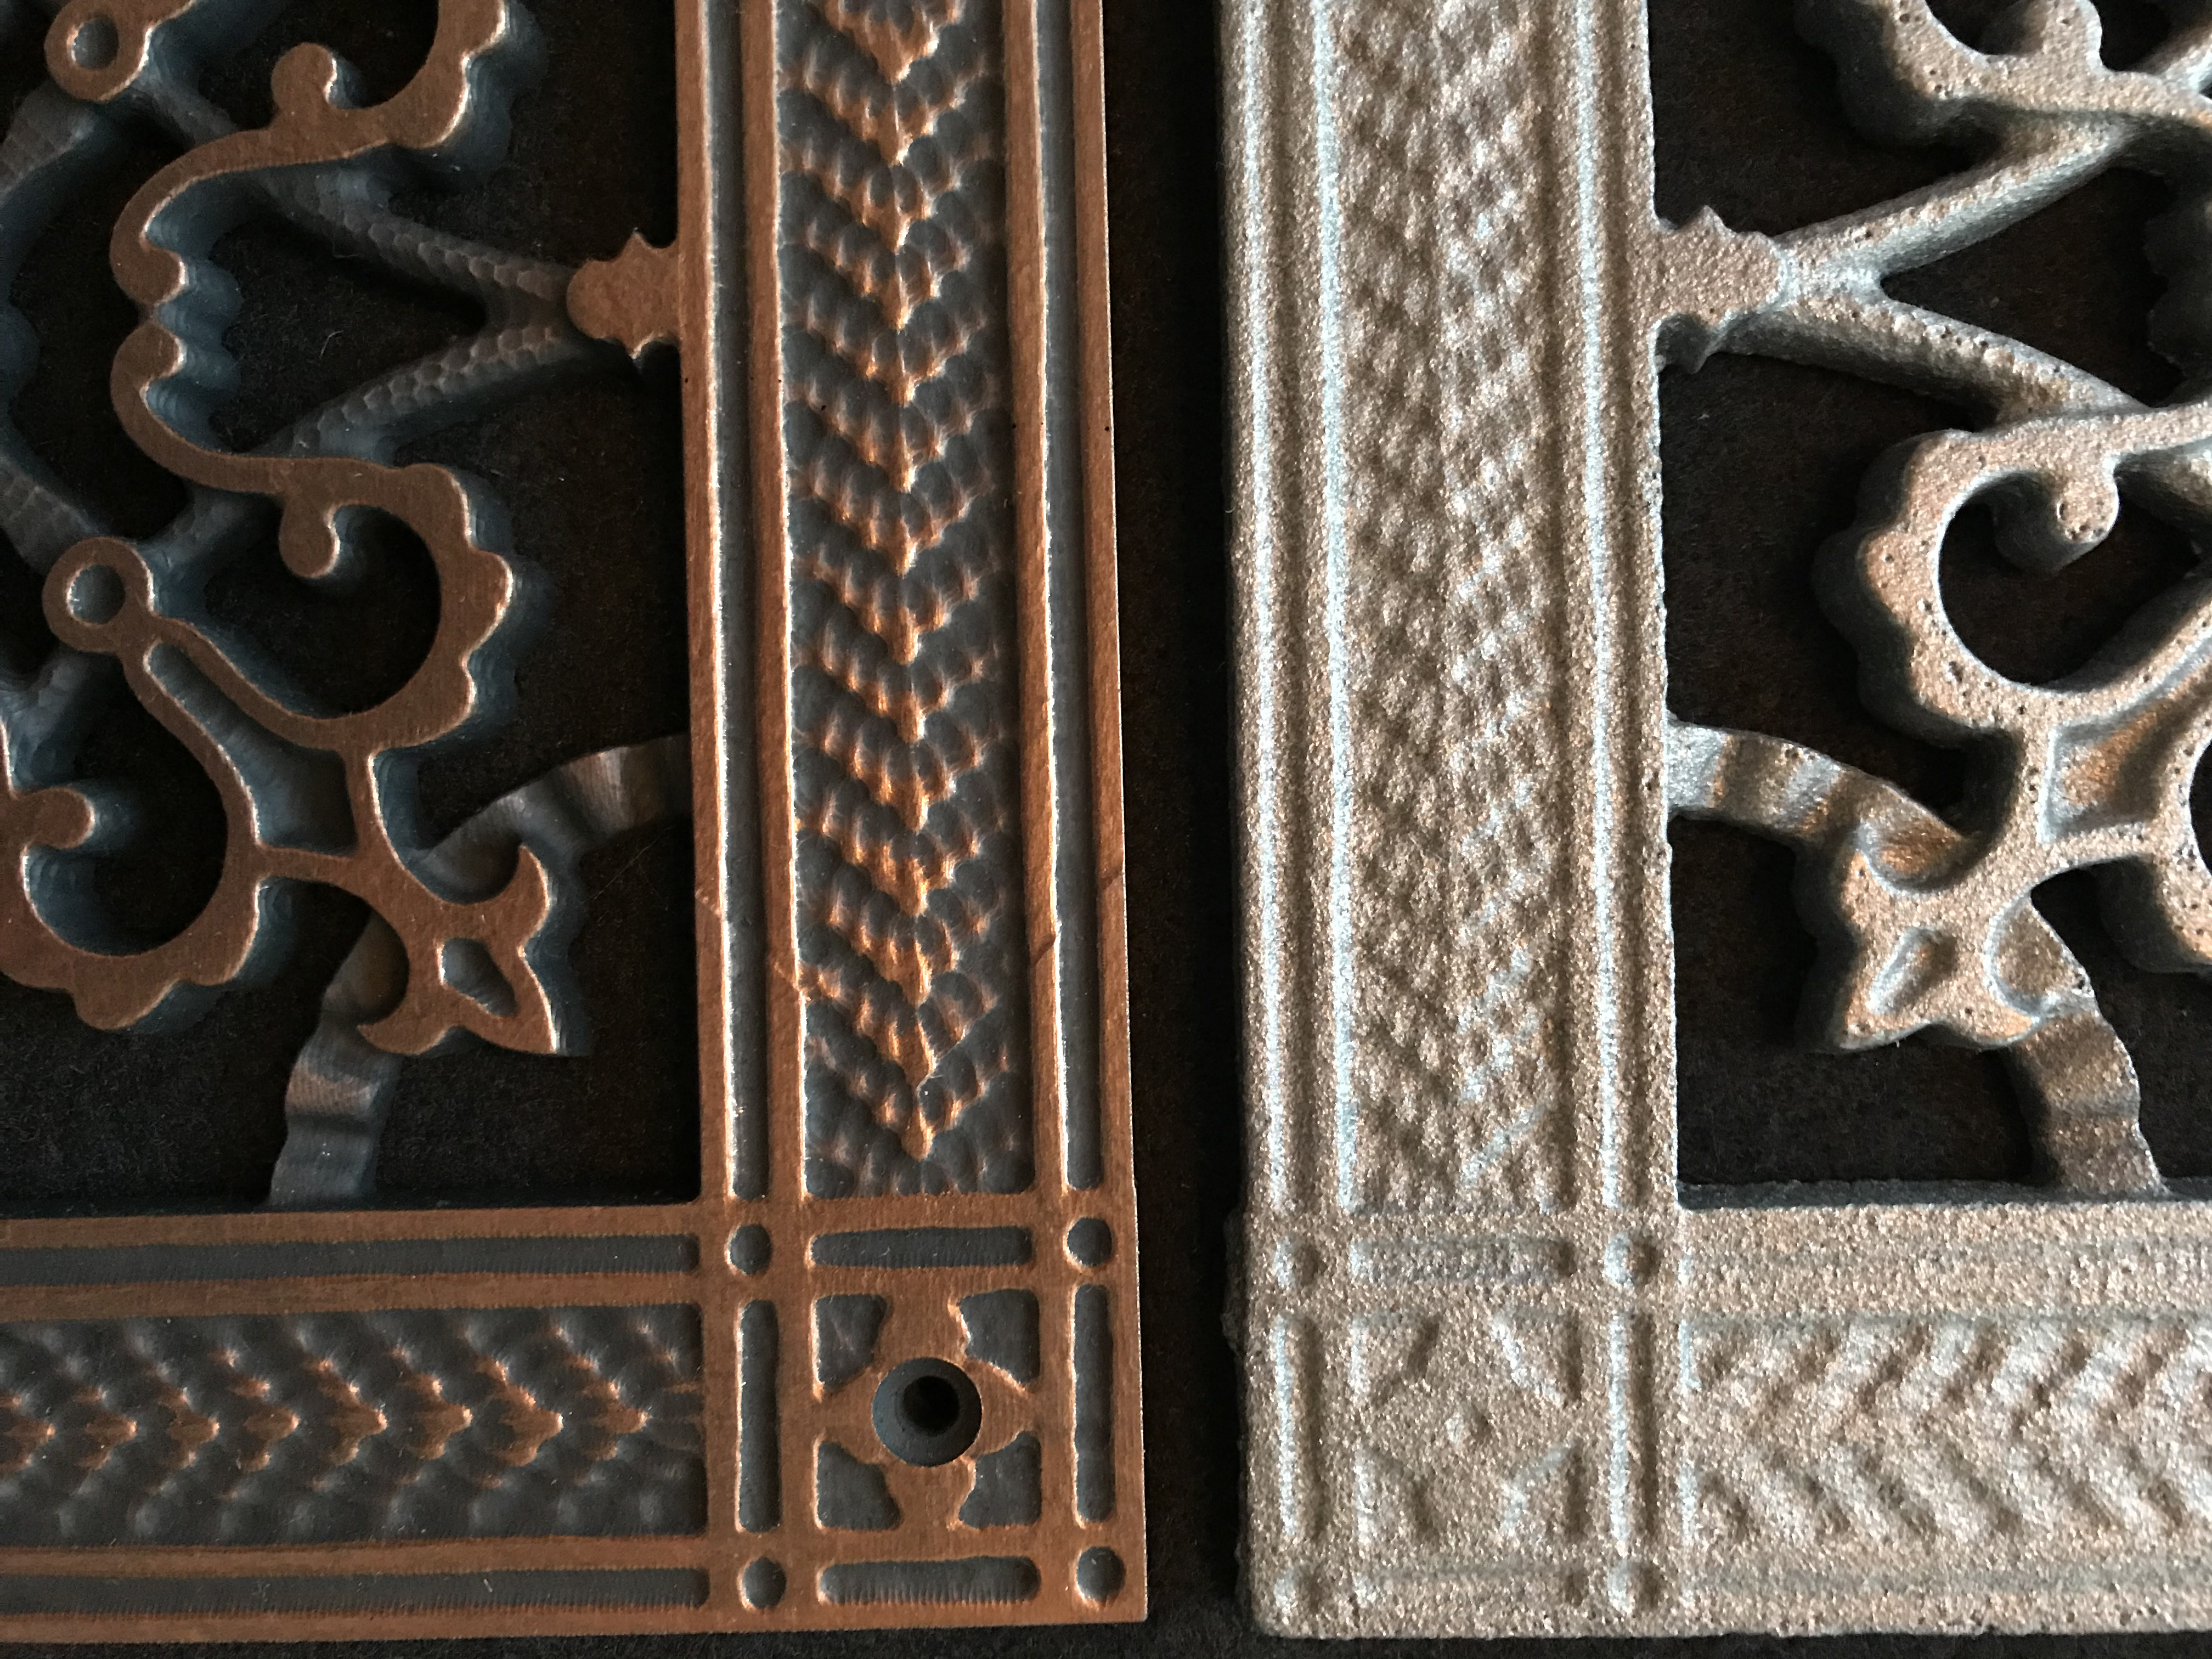 Frequently asked questions why we cast our grilles in resin. Image shows Iron casting and resin casting side by side showing the difference in quality.